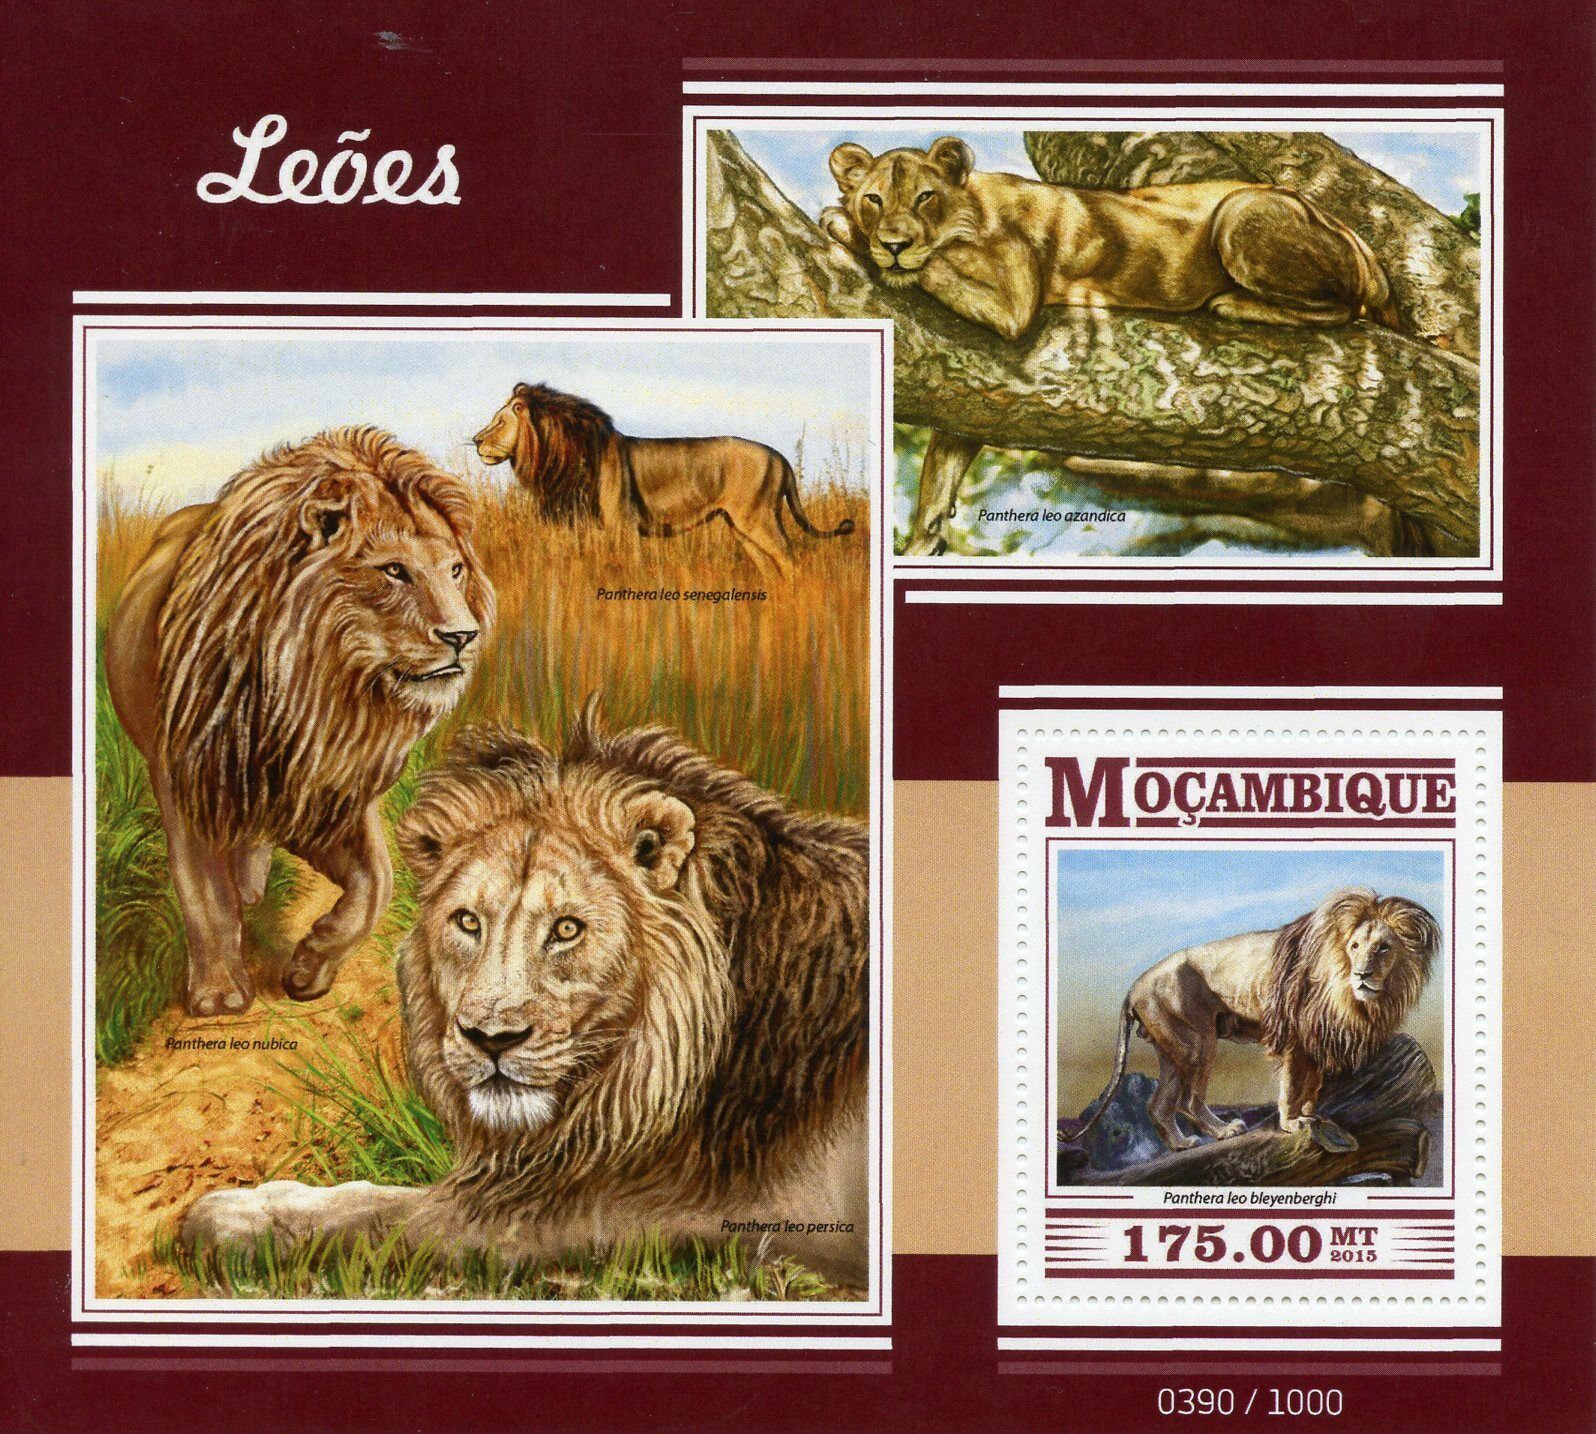 Mozambique 2015 MNH Lions 1v S/S Wild Animals Big Cats African Lion Stamps